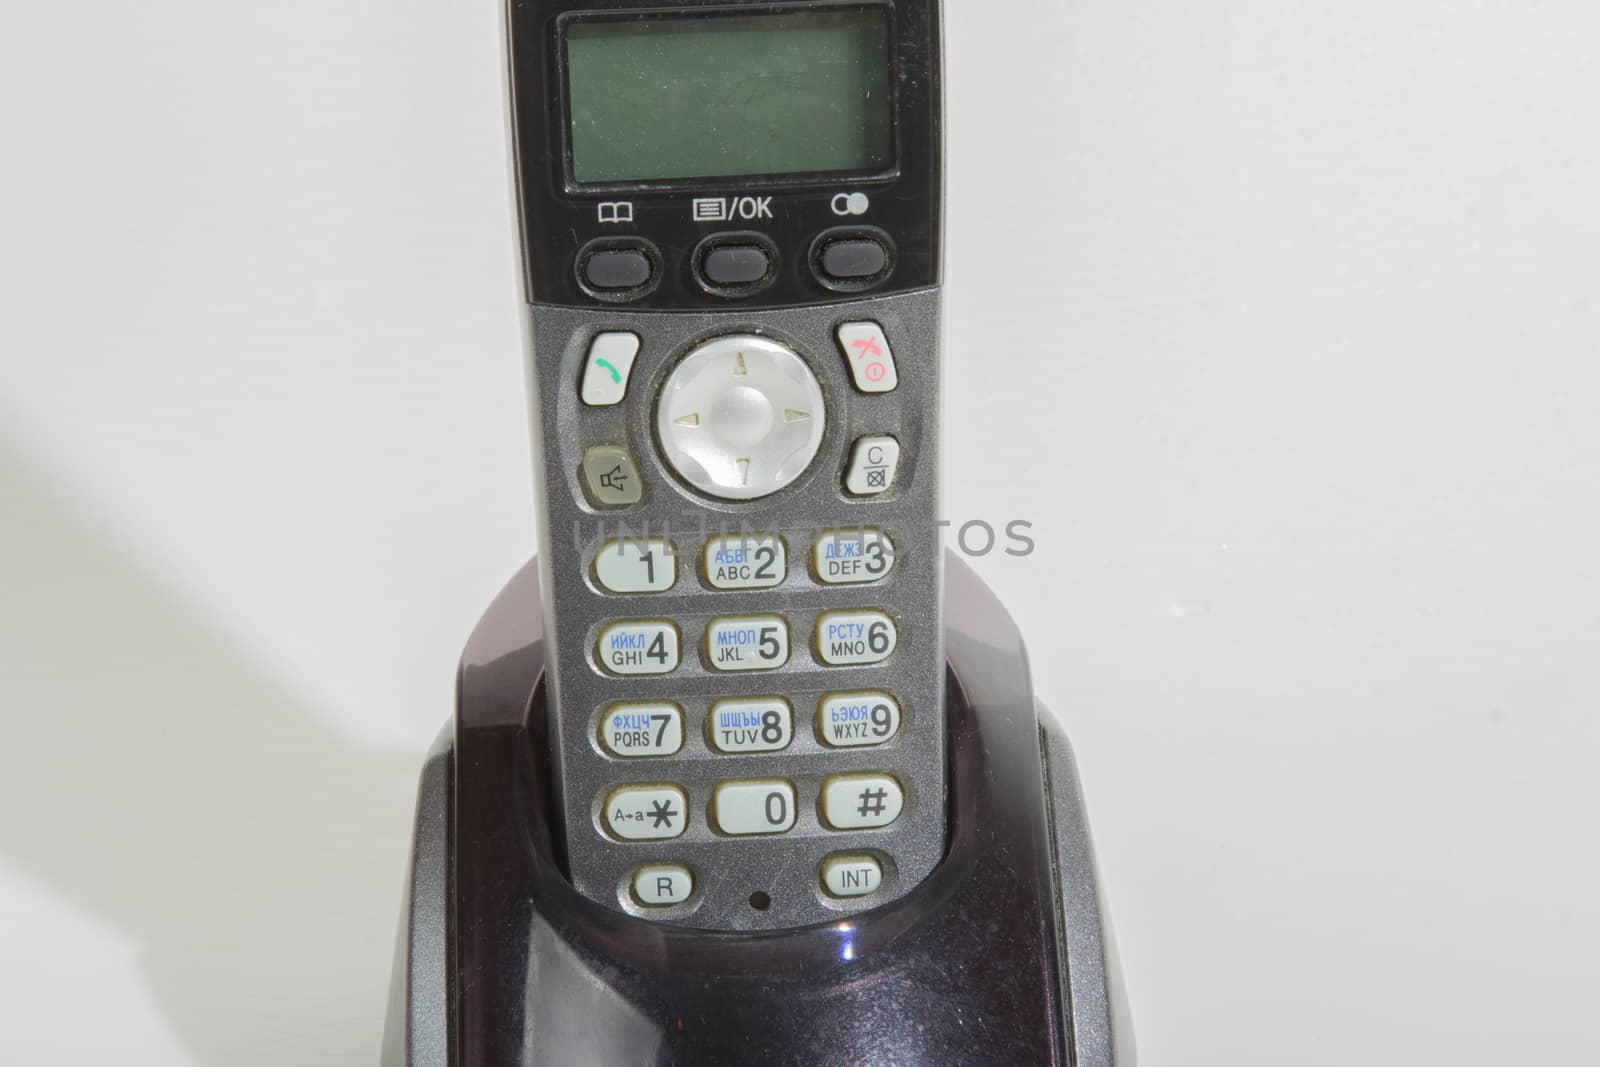 Black cordless phone on a white background